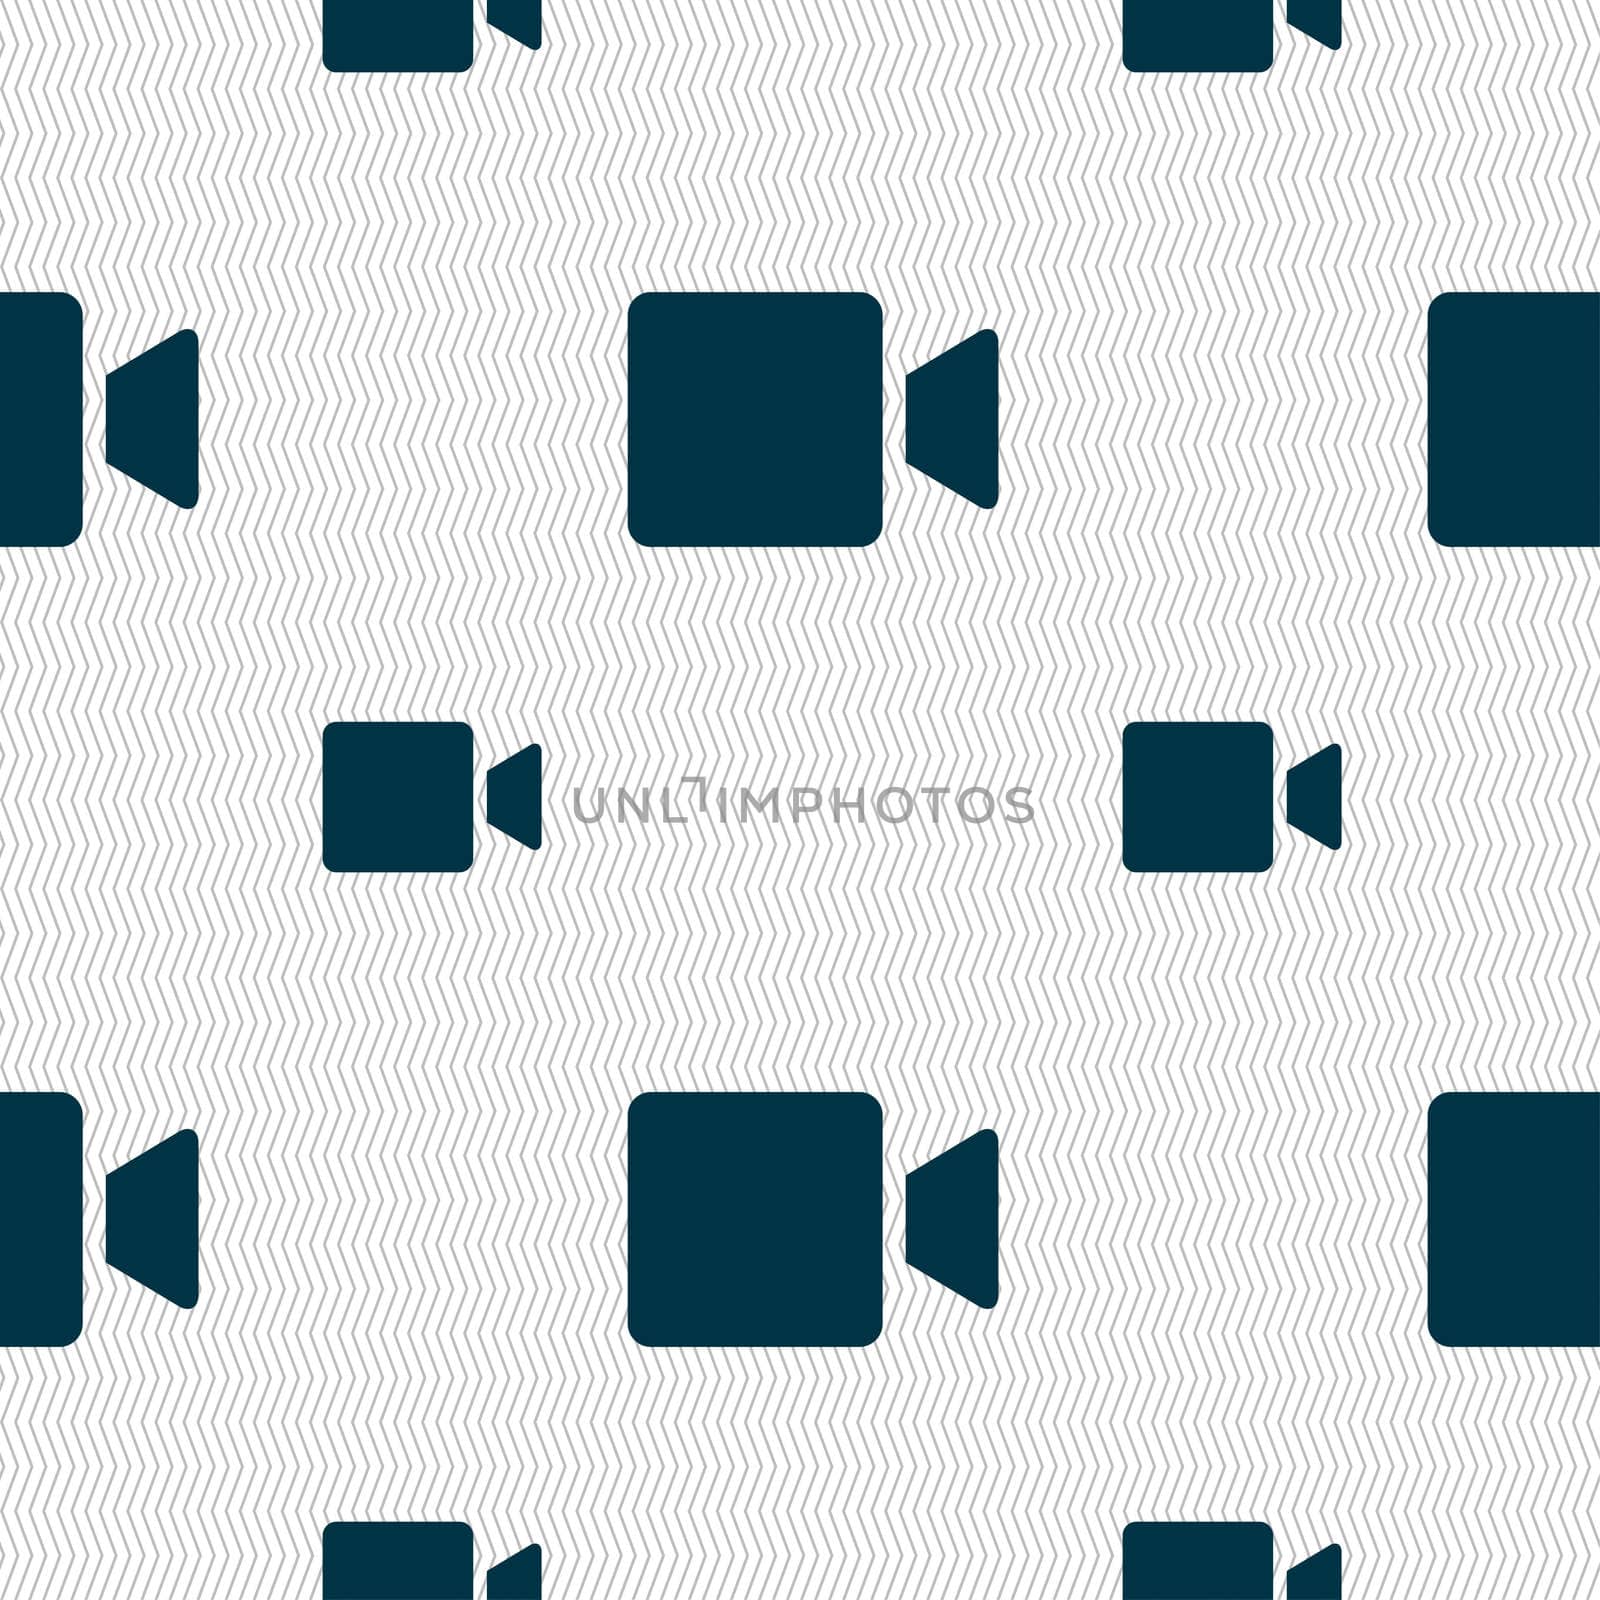 Video camera icon sign. Seamless pattern with geometric texture. illustration